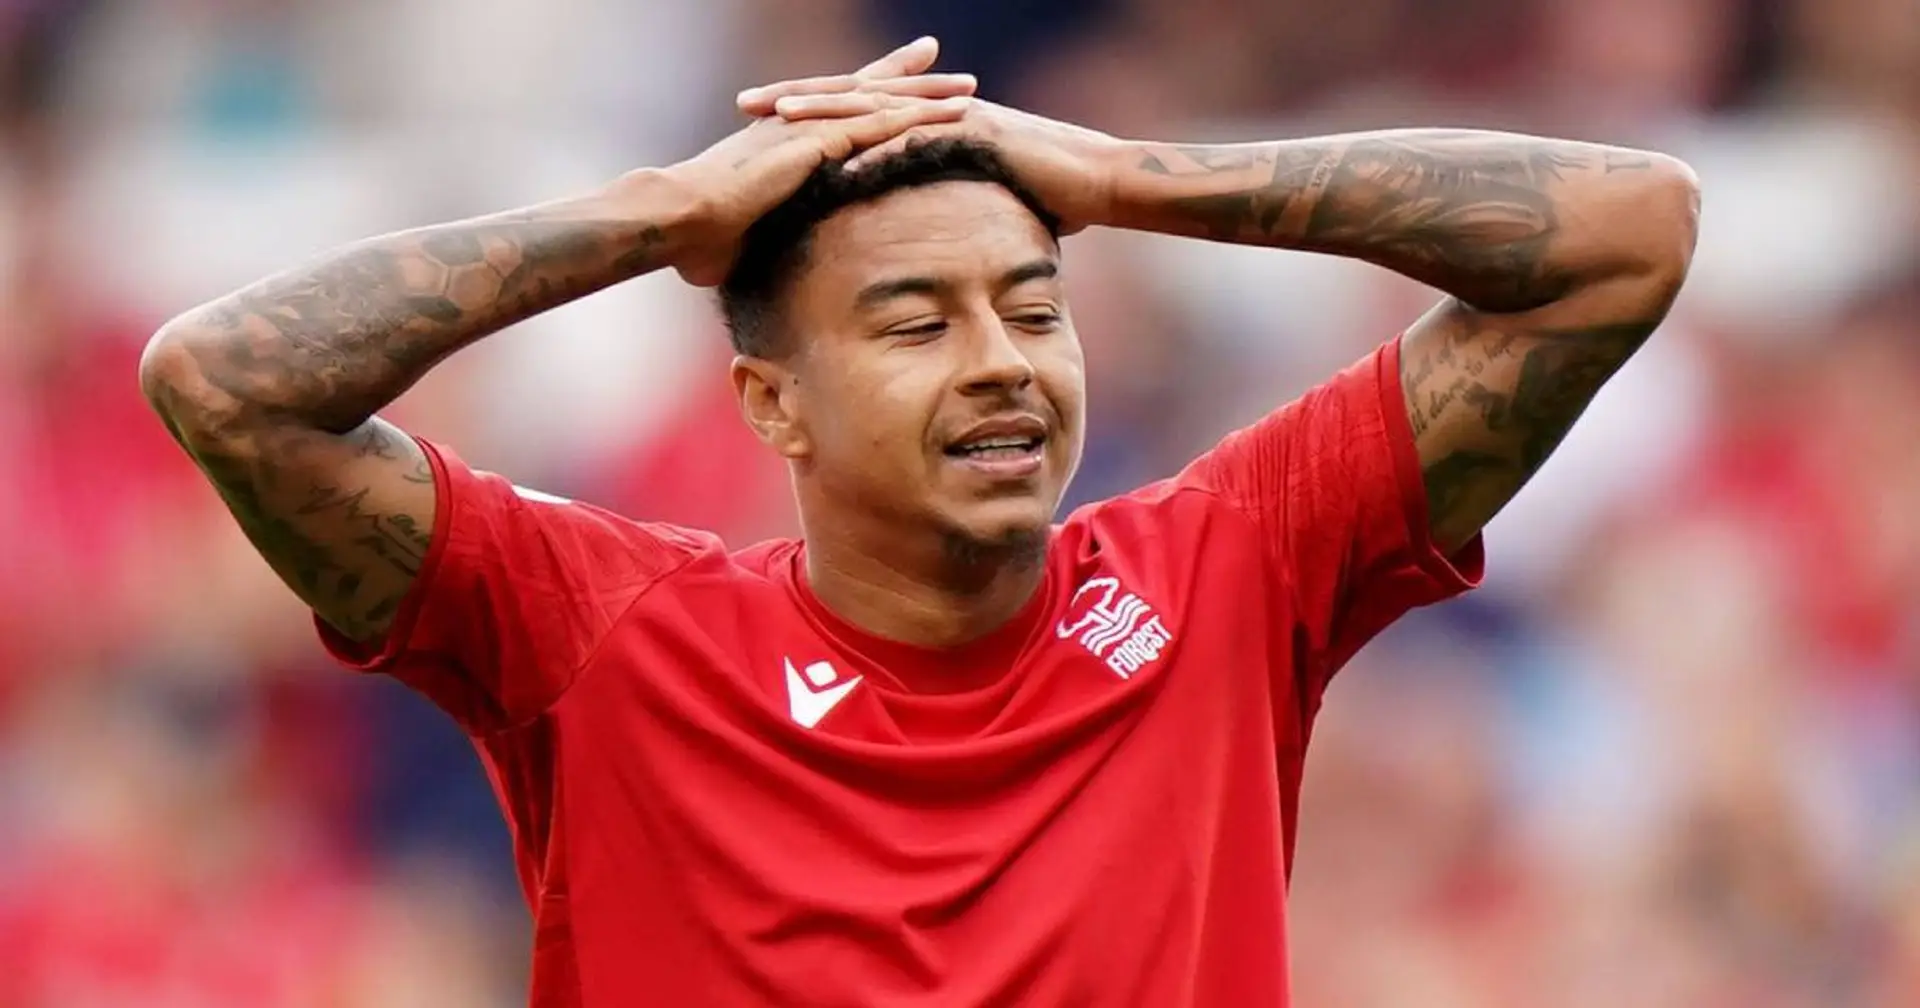 Jesse Lingard 'cuts ties' with his agent as he remains without a club for a year